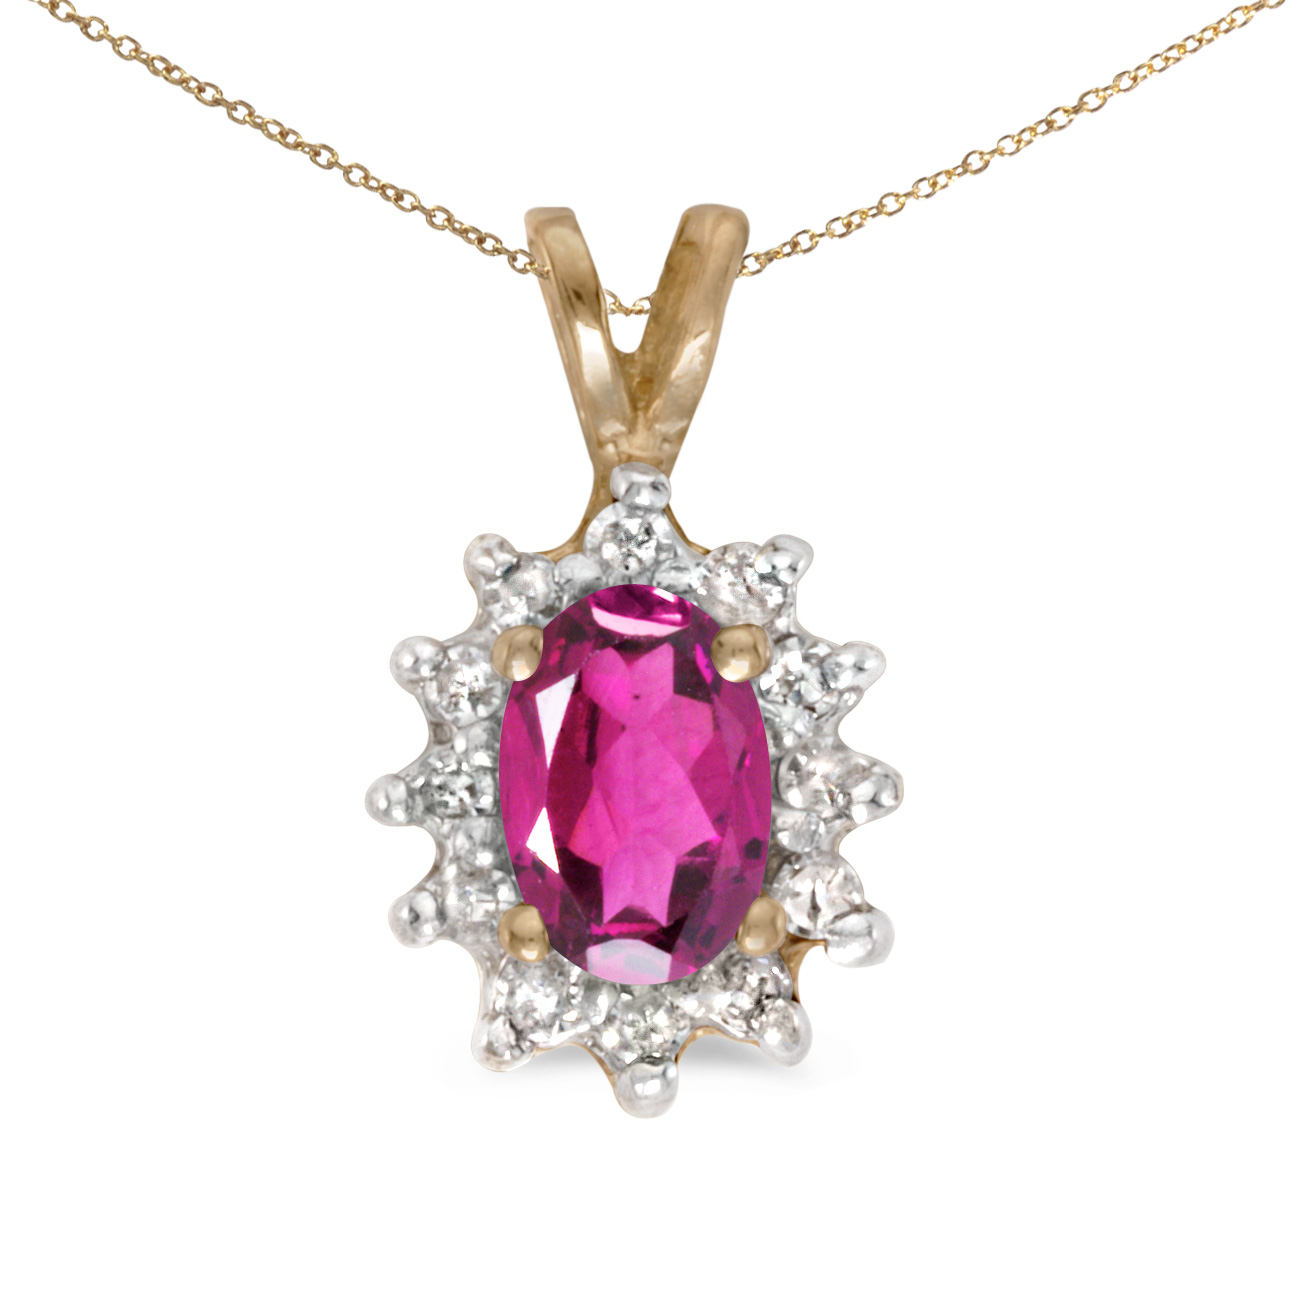 This 14k yellow gold oval pink topaz and diamond pendant features a 6x4 mm genuine natural pink t...